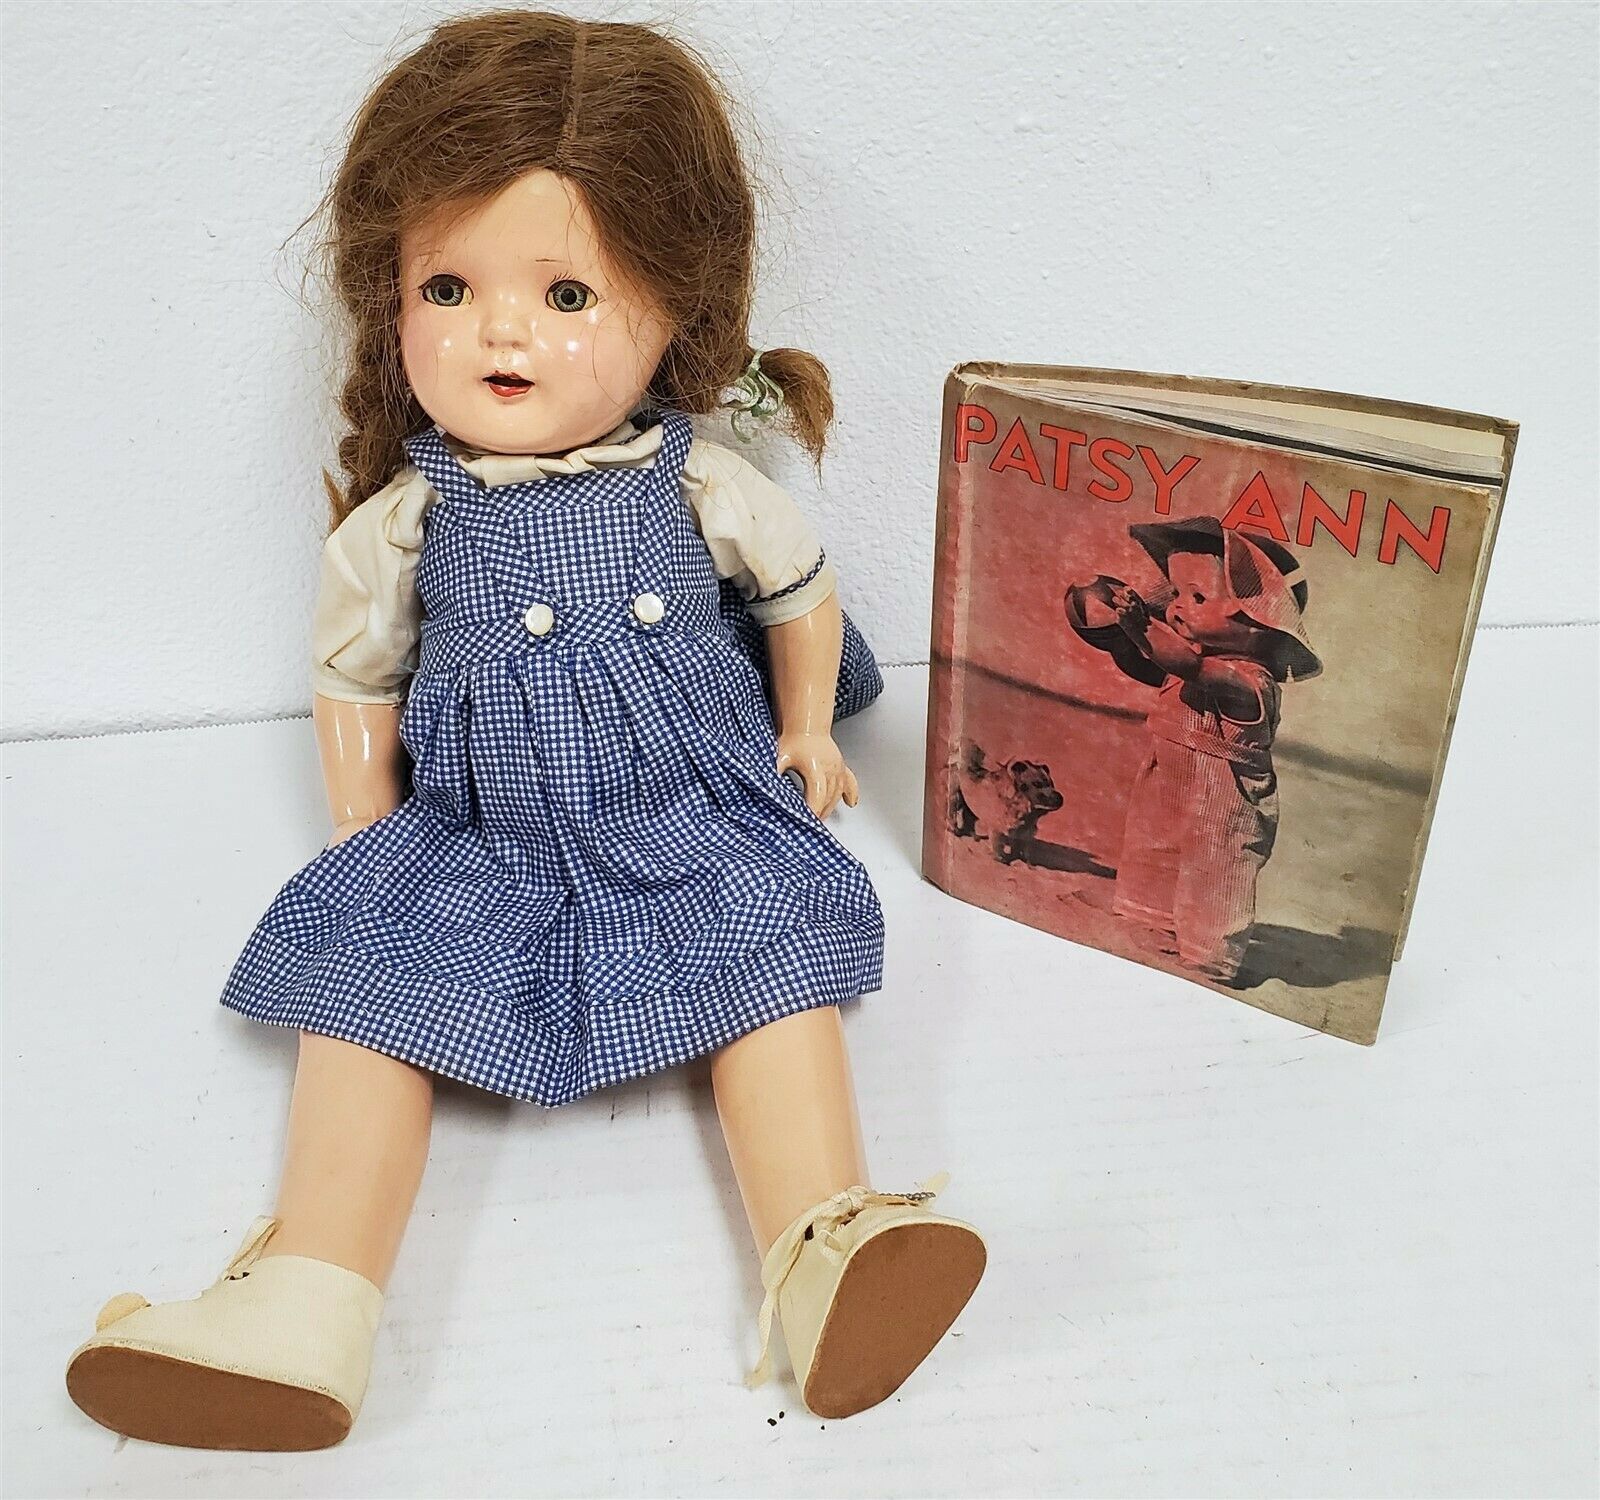 H135 Vintage 30/40's Arranbee Nancy Doll Composition 16" Tall W/ Patsy Ann Book